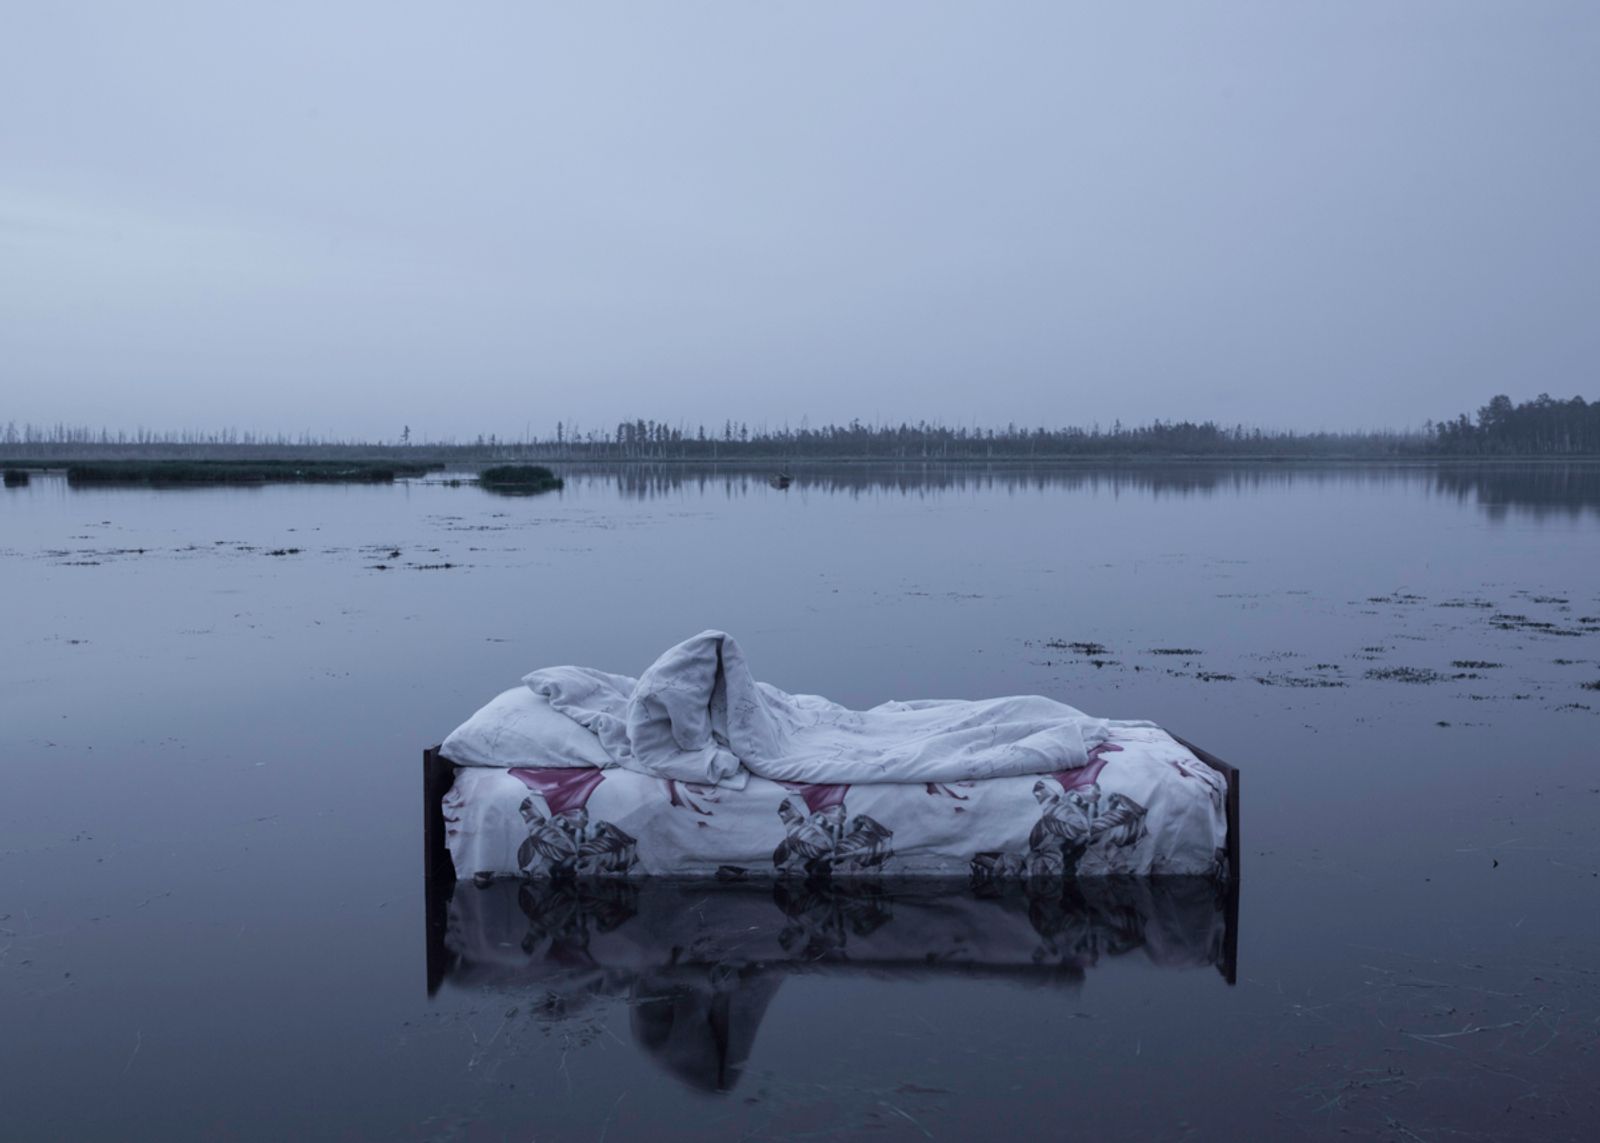 © Alexey Vasilyev - A bed on the lake. From the main character dream scene of the mystical drama "The Cursed Land".